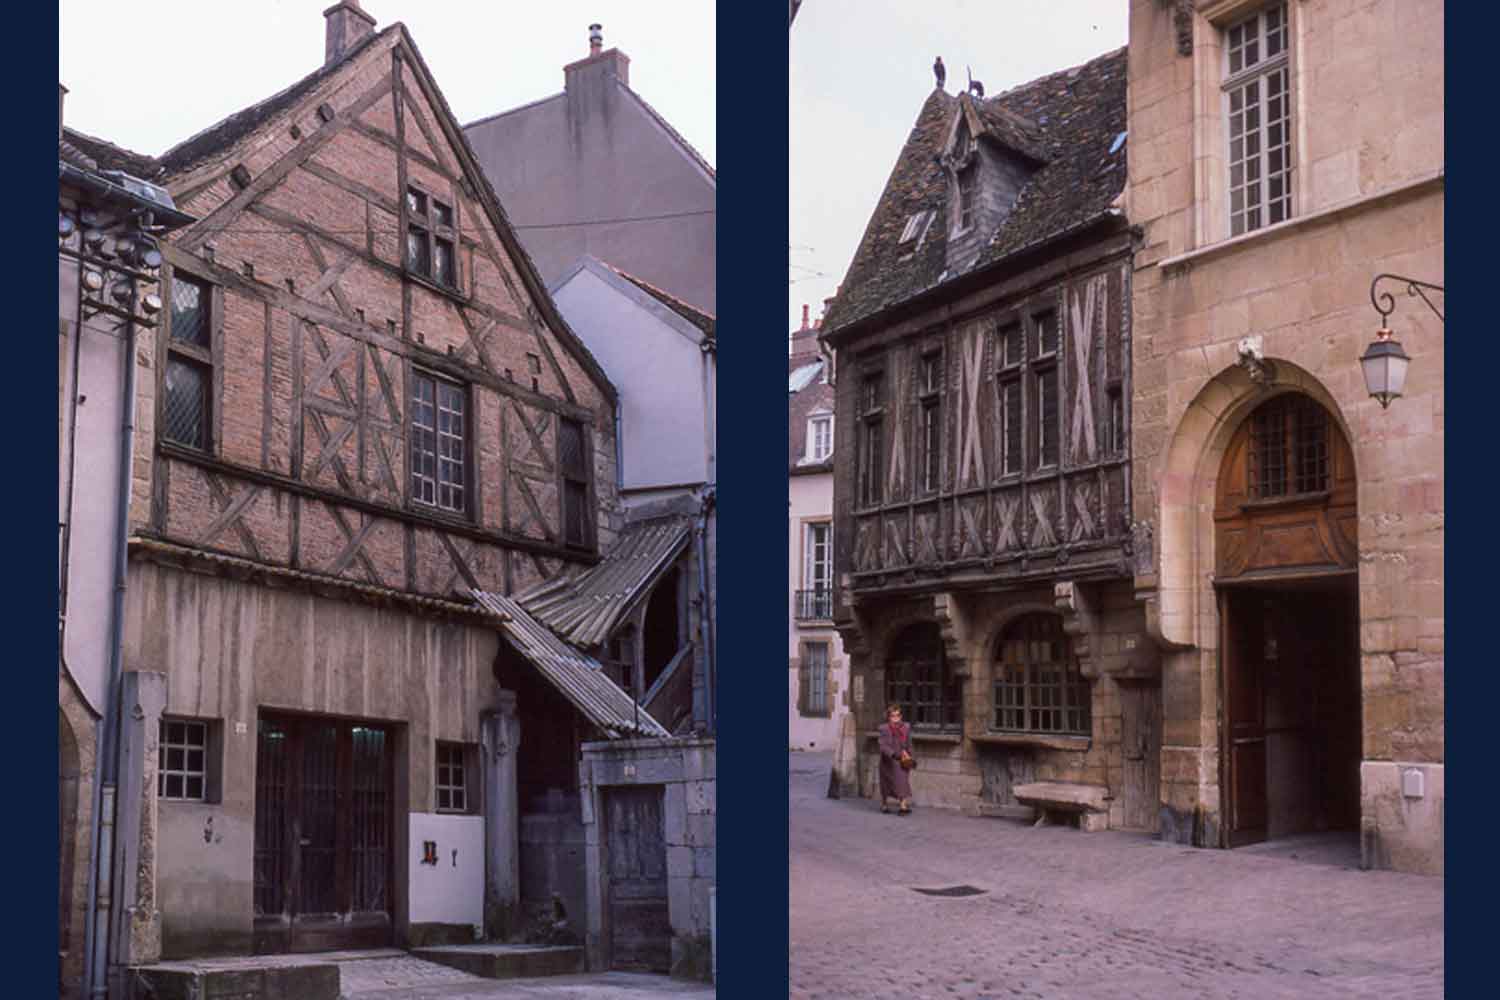 photos of two old houses with exposed timber on the top half of the houses.